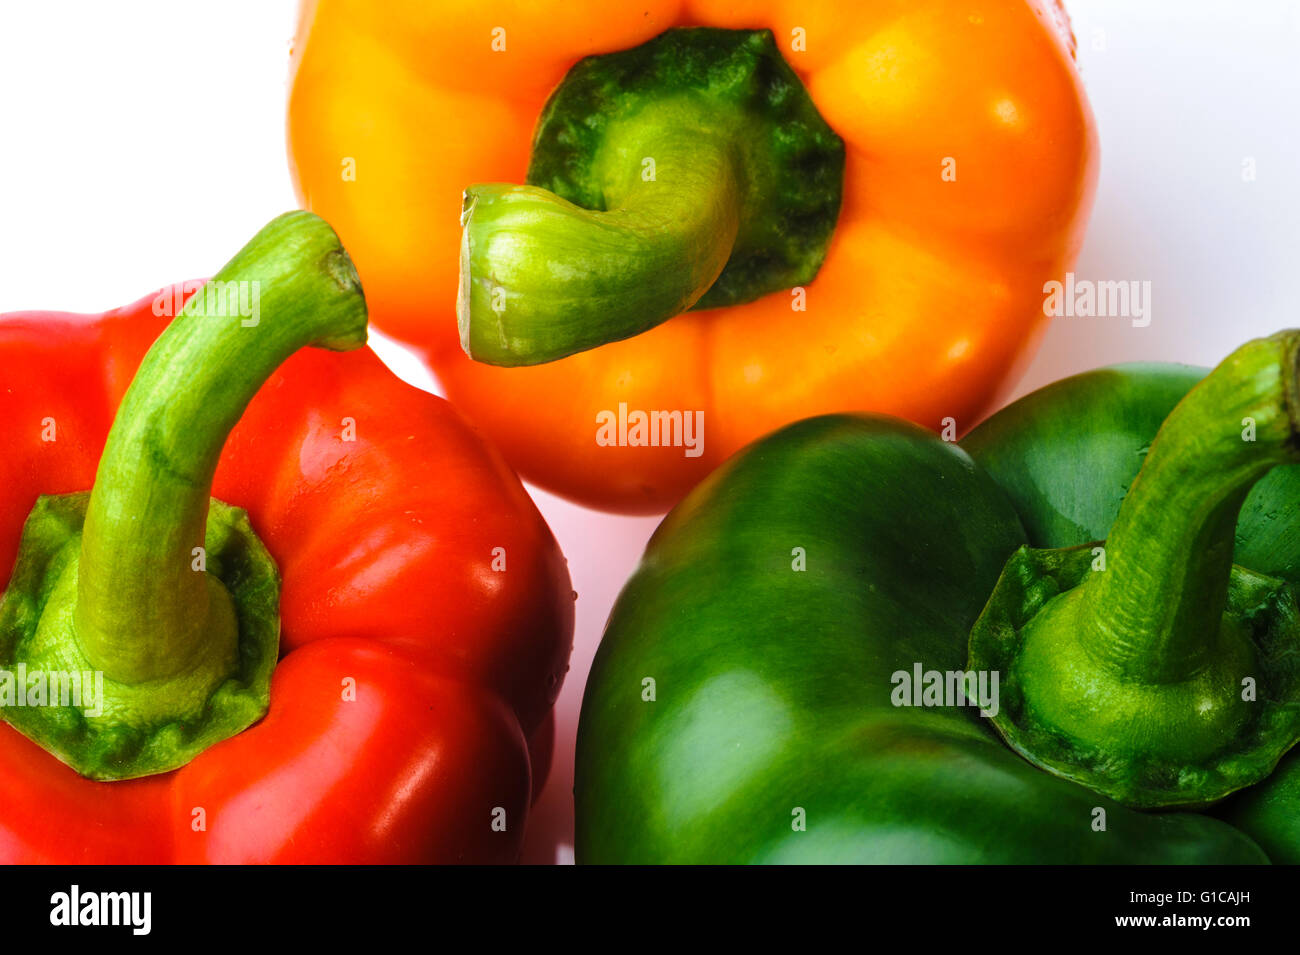 Bell Pepper Capsicum red yellow orange green. Group of  3 peppers. Stock Photo